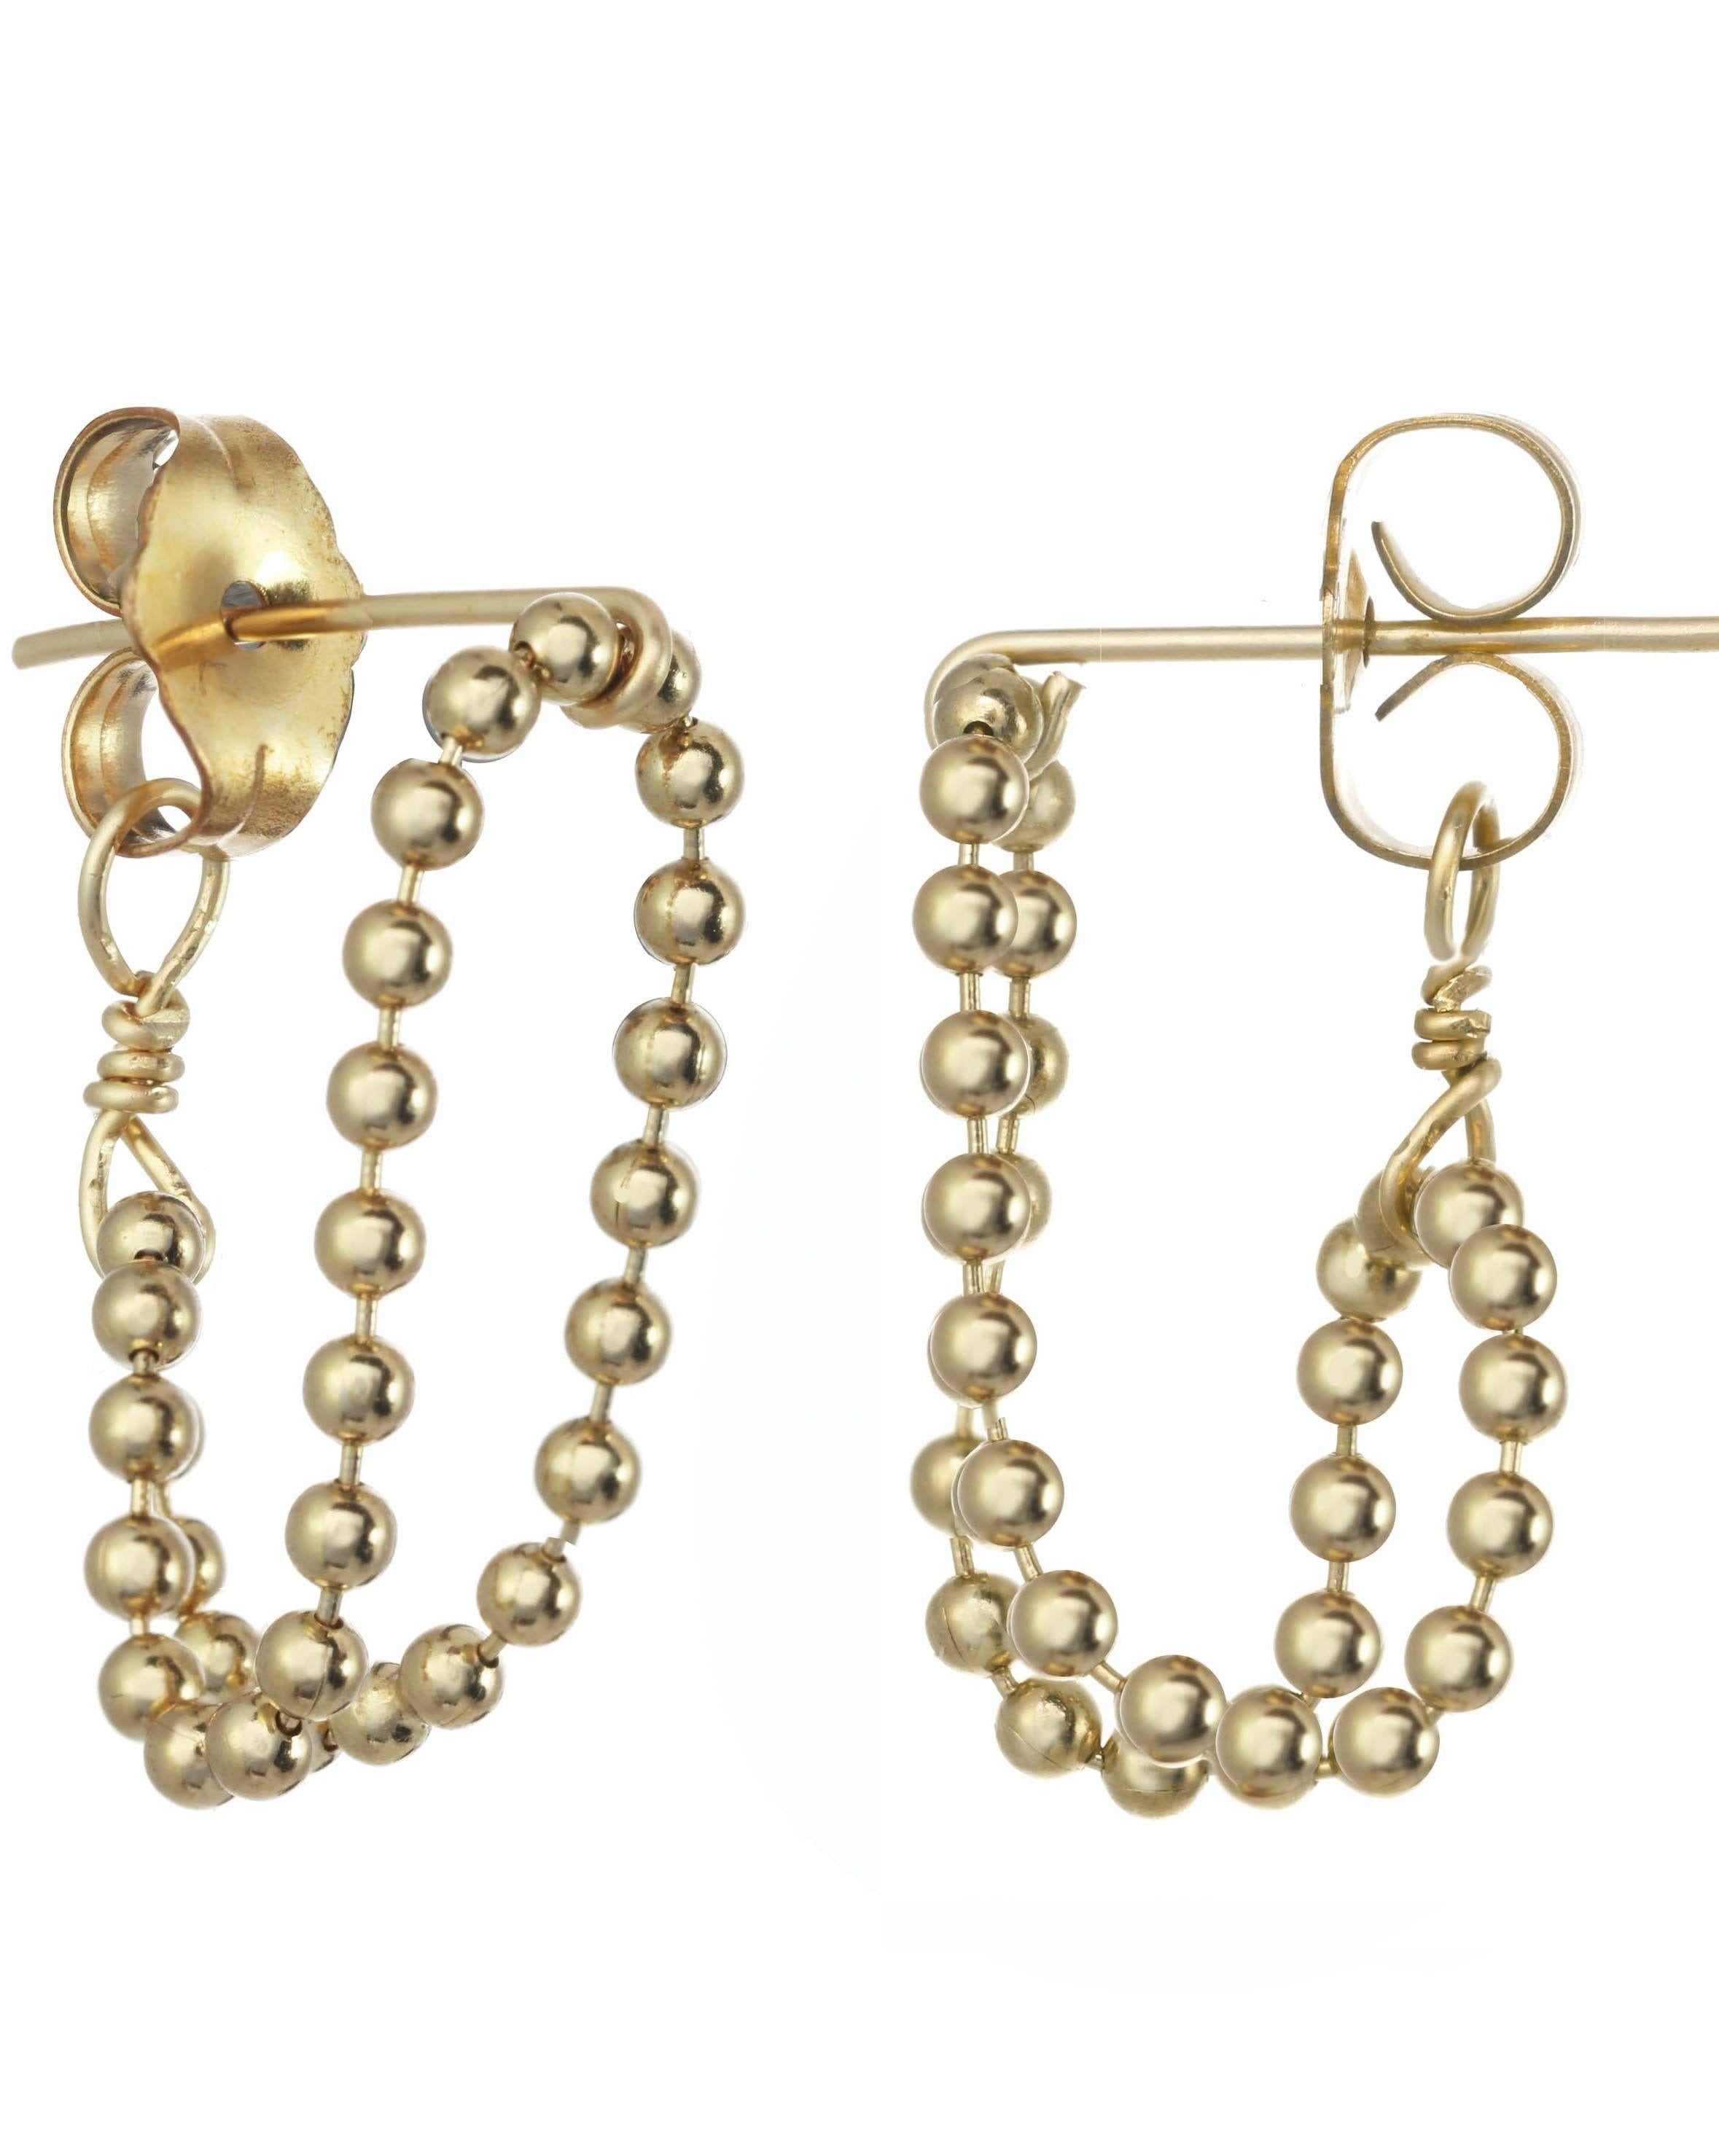 Venla Huggie Earrings by KOZAKH. Stud earrings, crafted in 14K Gold Filled, featuring a strand of 1mm seamless beads.